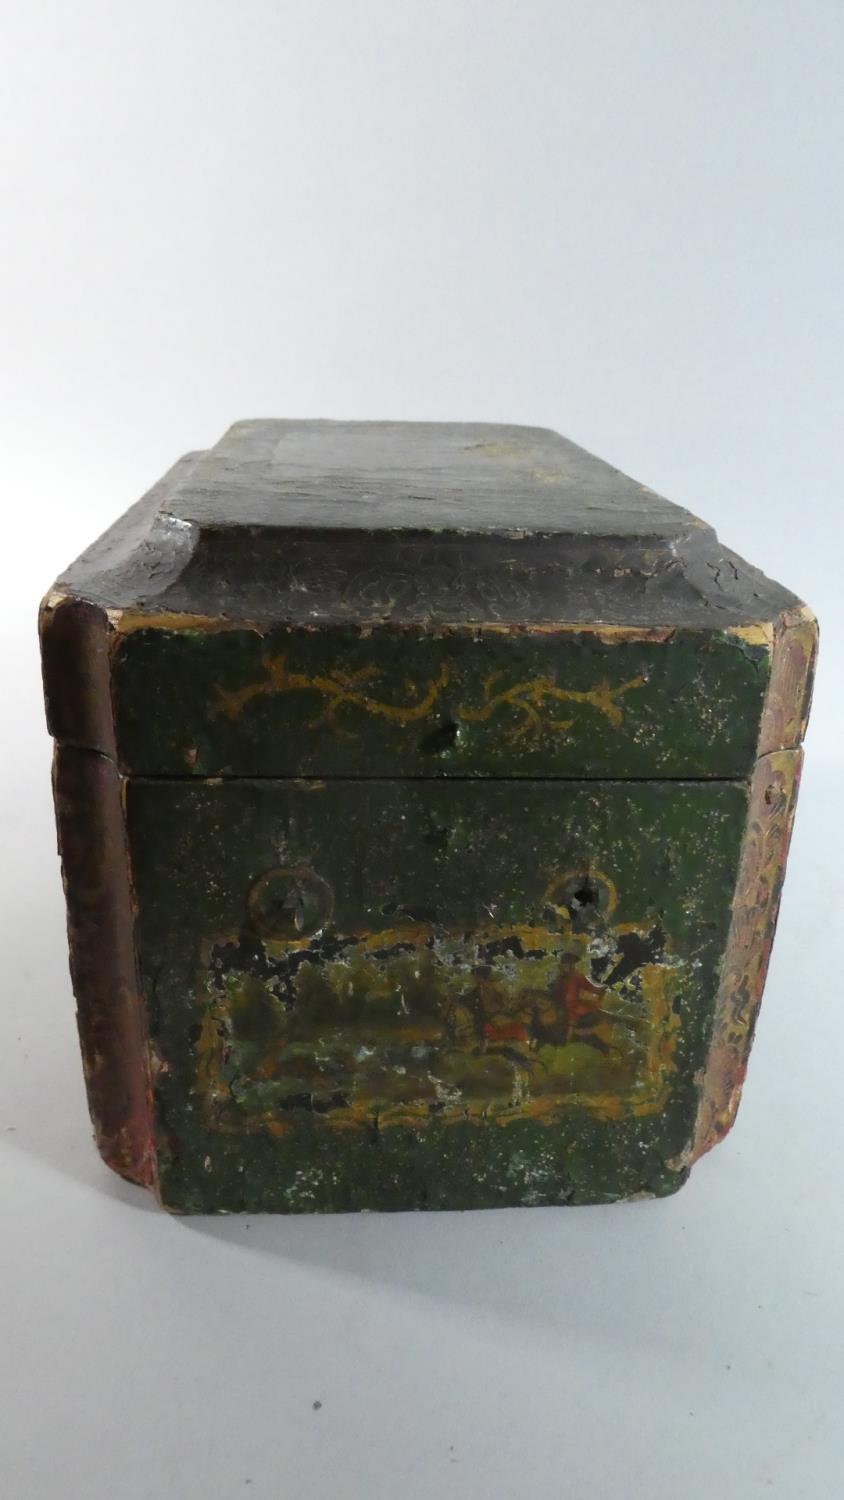 A Late 19th Century Three Division Tea Caddy of Sarcophagus Form with Decoupage Decoration - Image 3 of 6